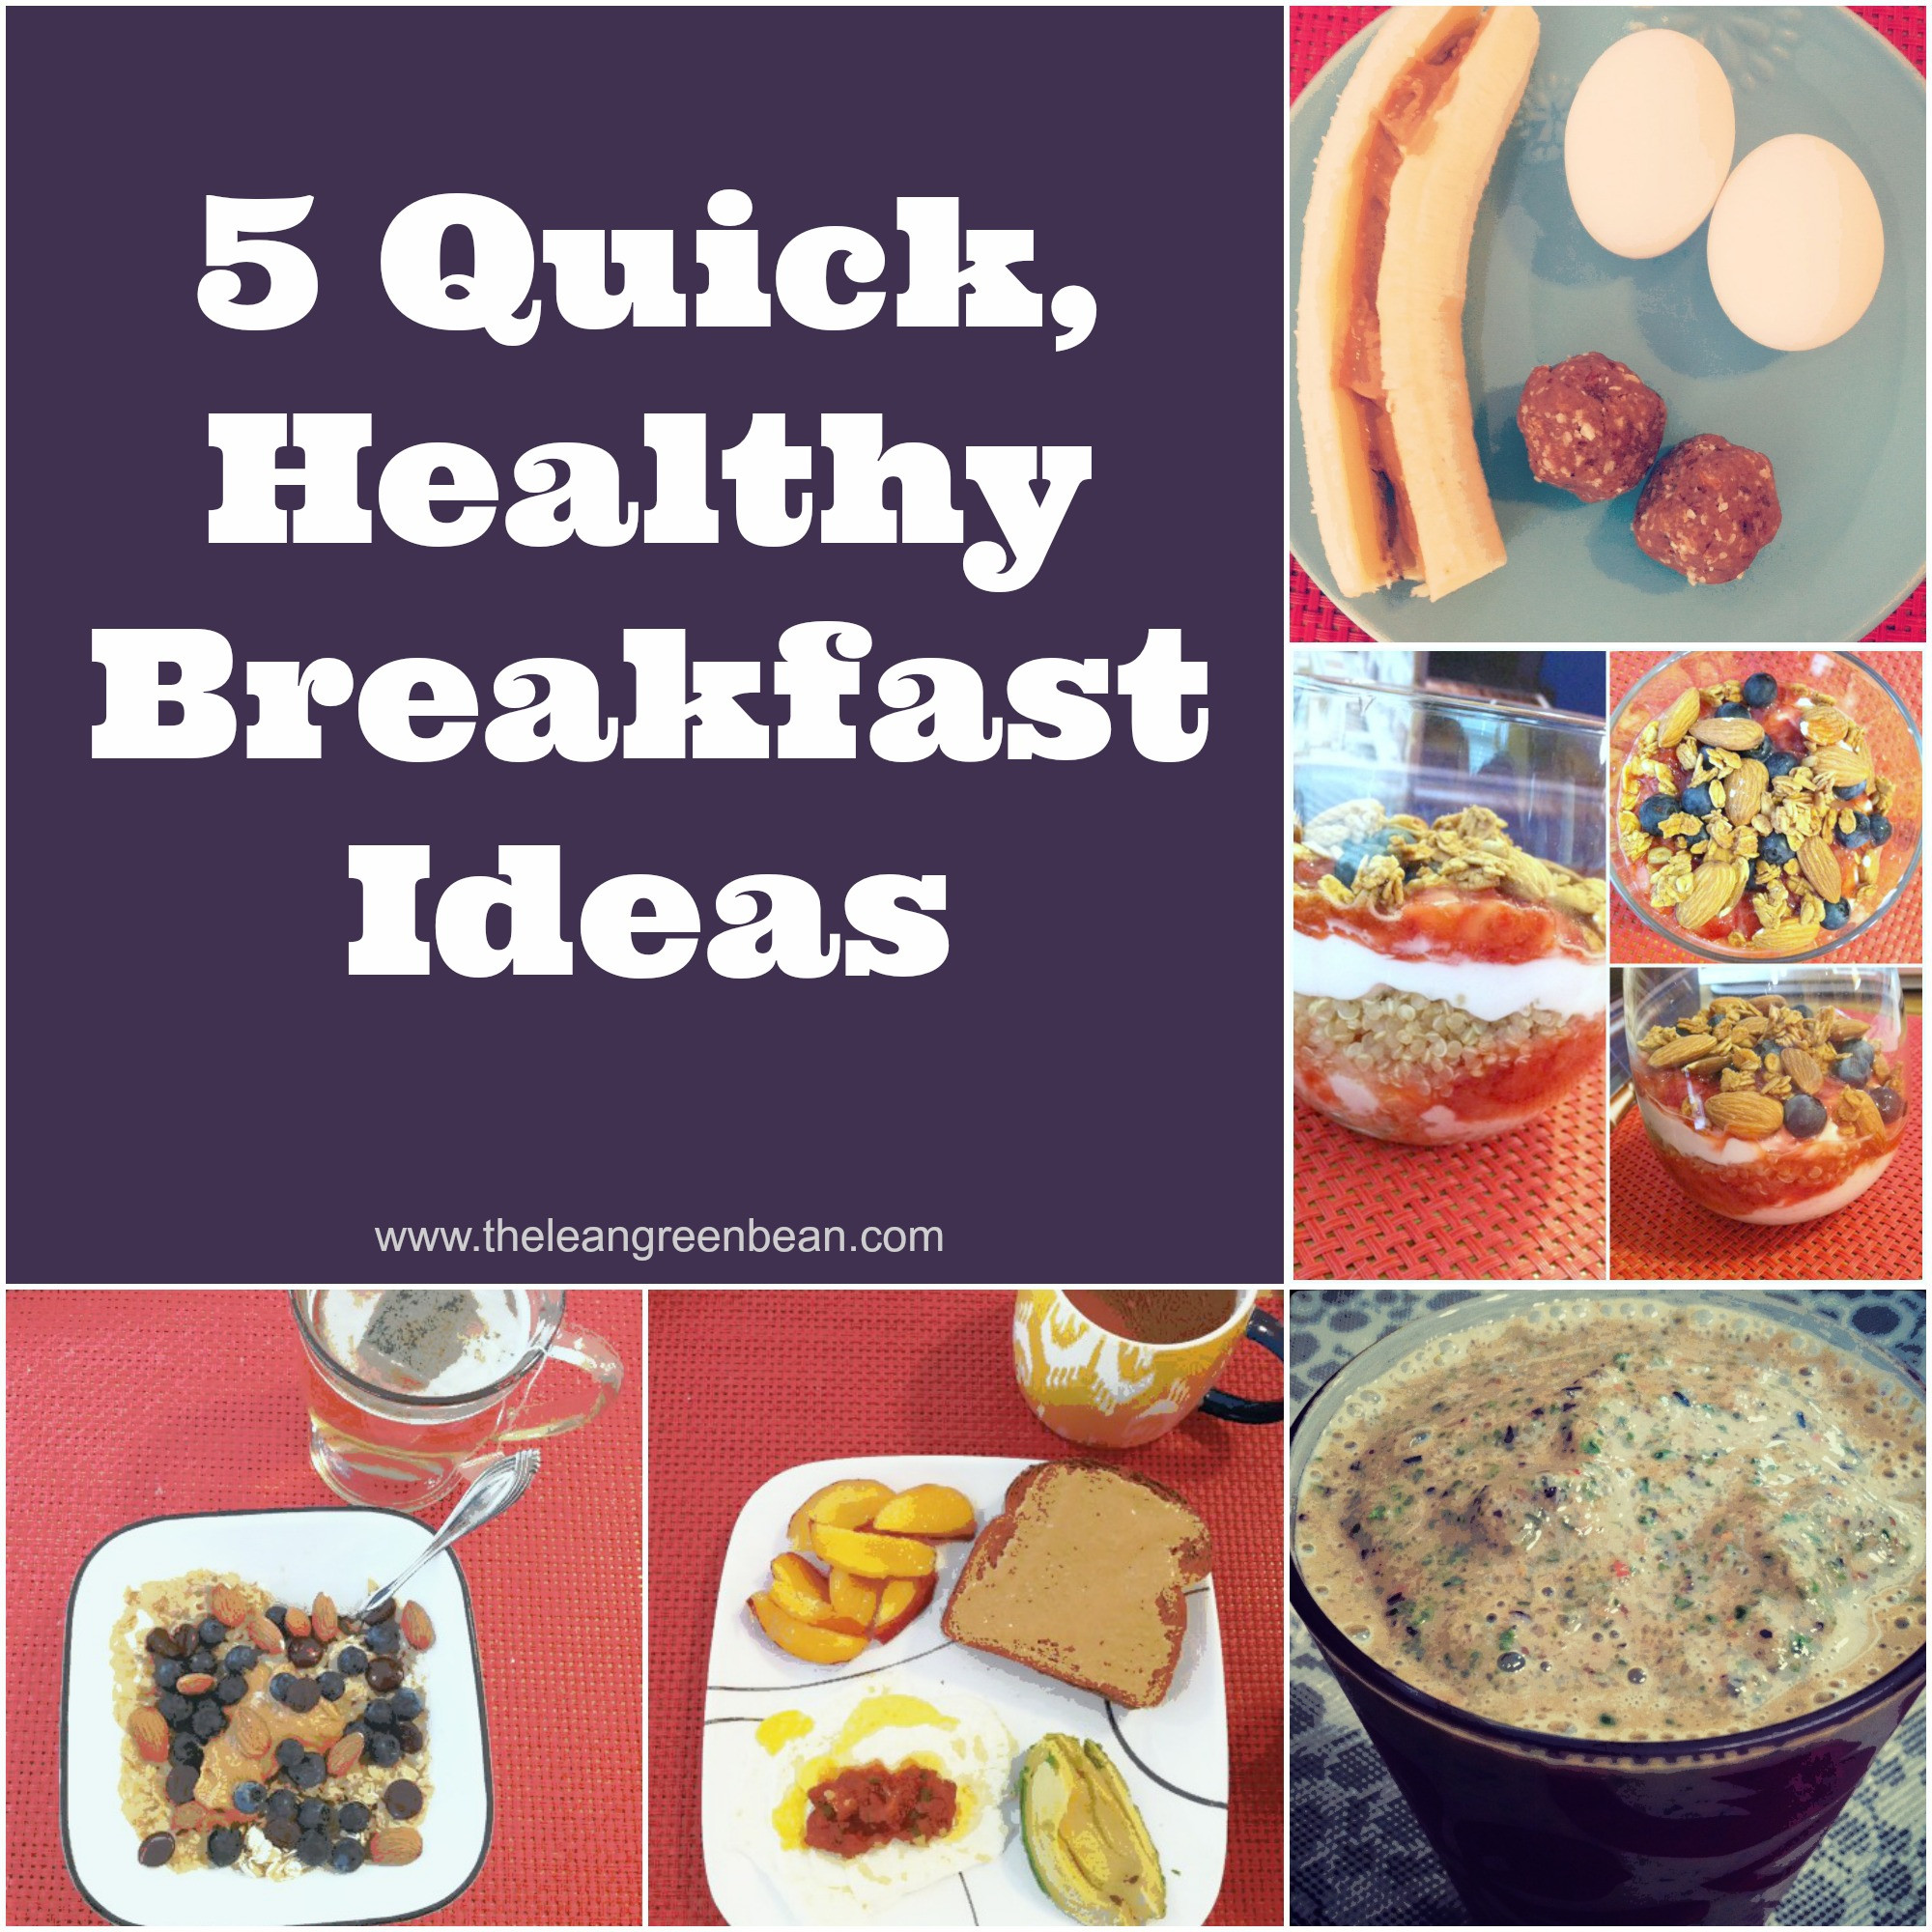 Healthy Easy Breakfast Recipes
 5 Quick Healthy Breakfast Ideas from a Registered Dietitian